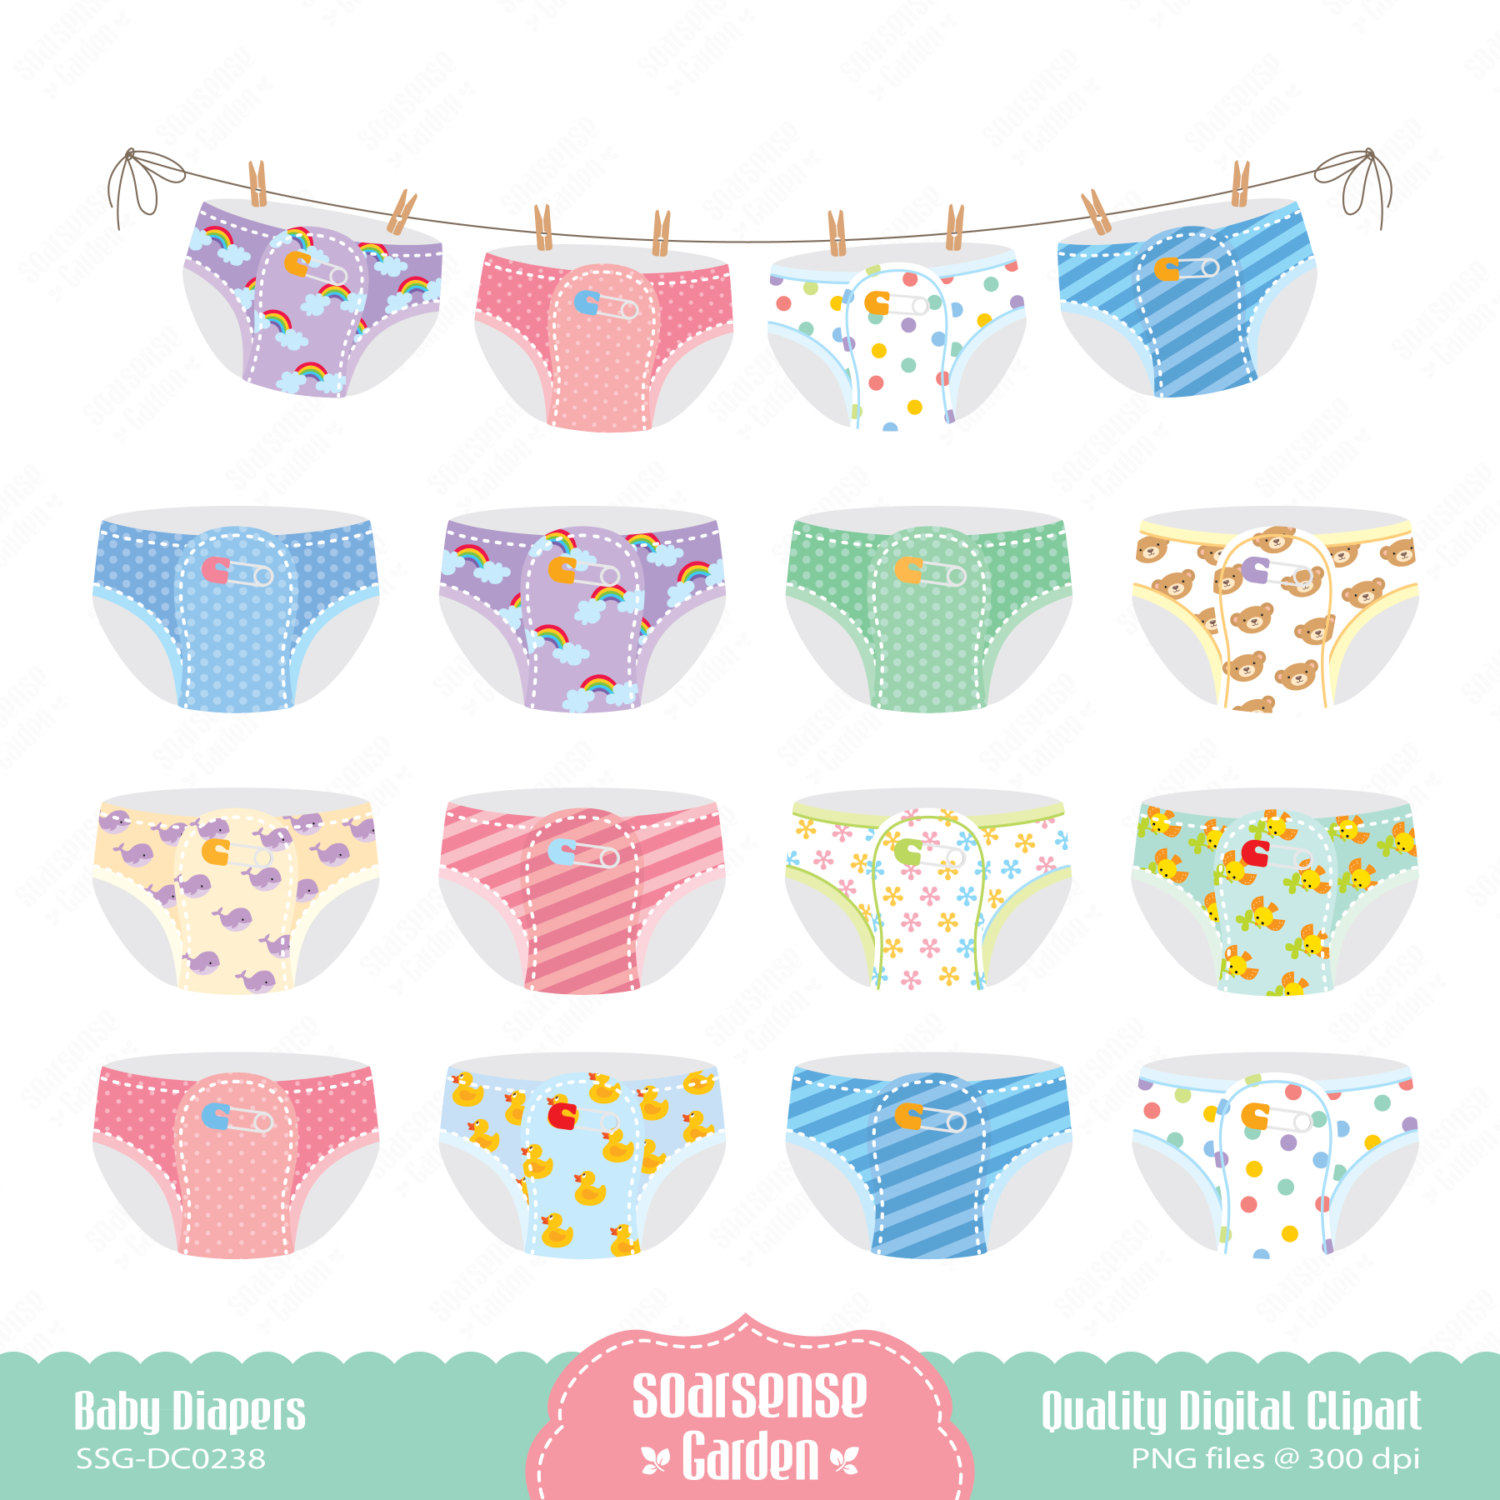 Baby Diapers Digital Clipart May 14 2014 At 03 34am